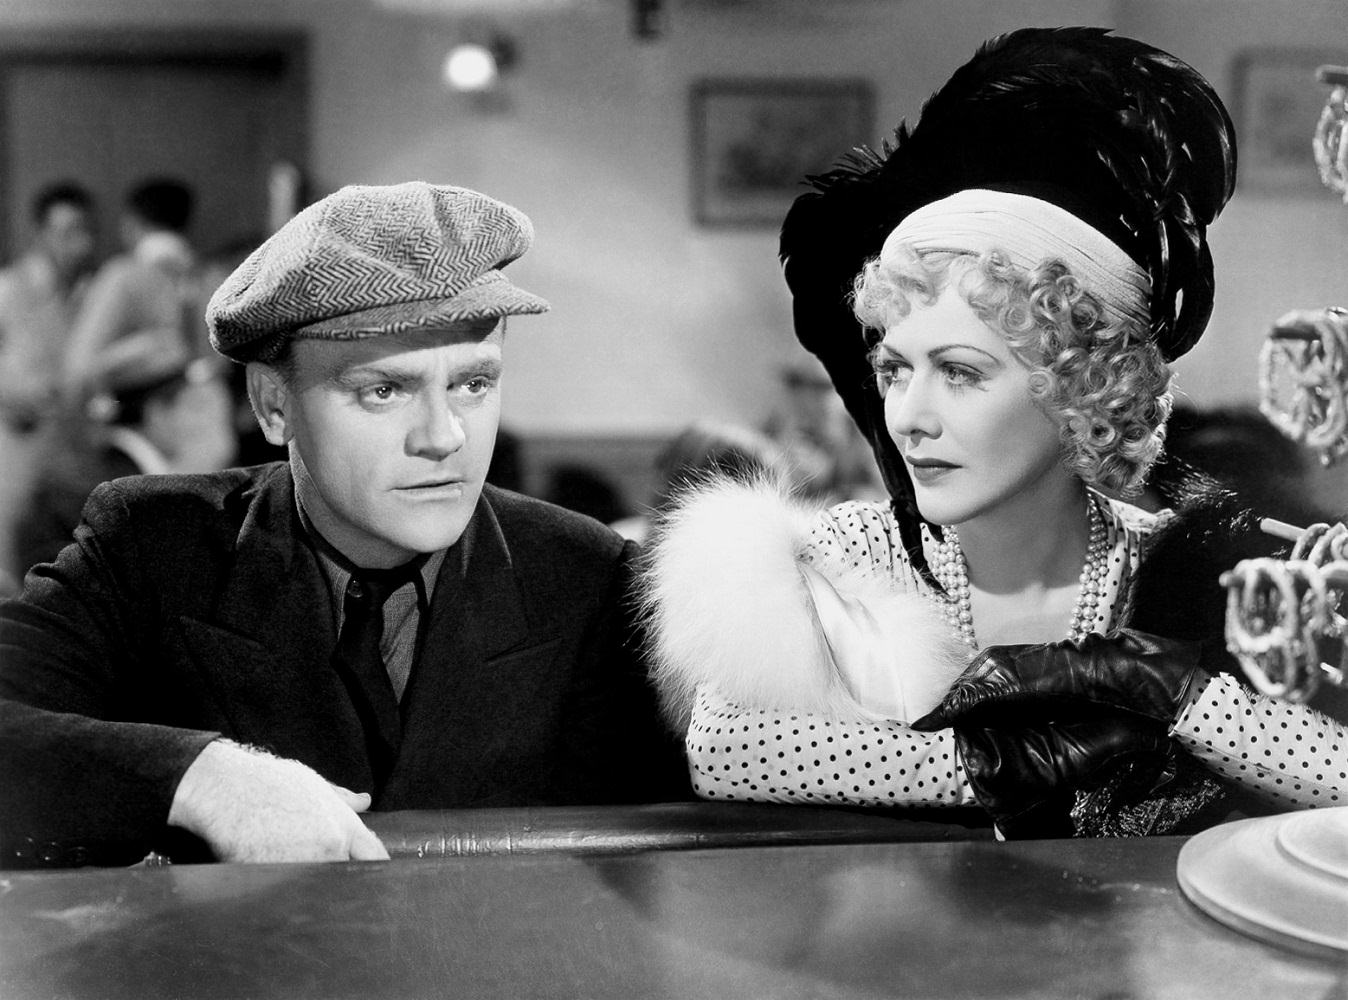 James Cagney and Gladys George in The roaring twenties, 1939